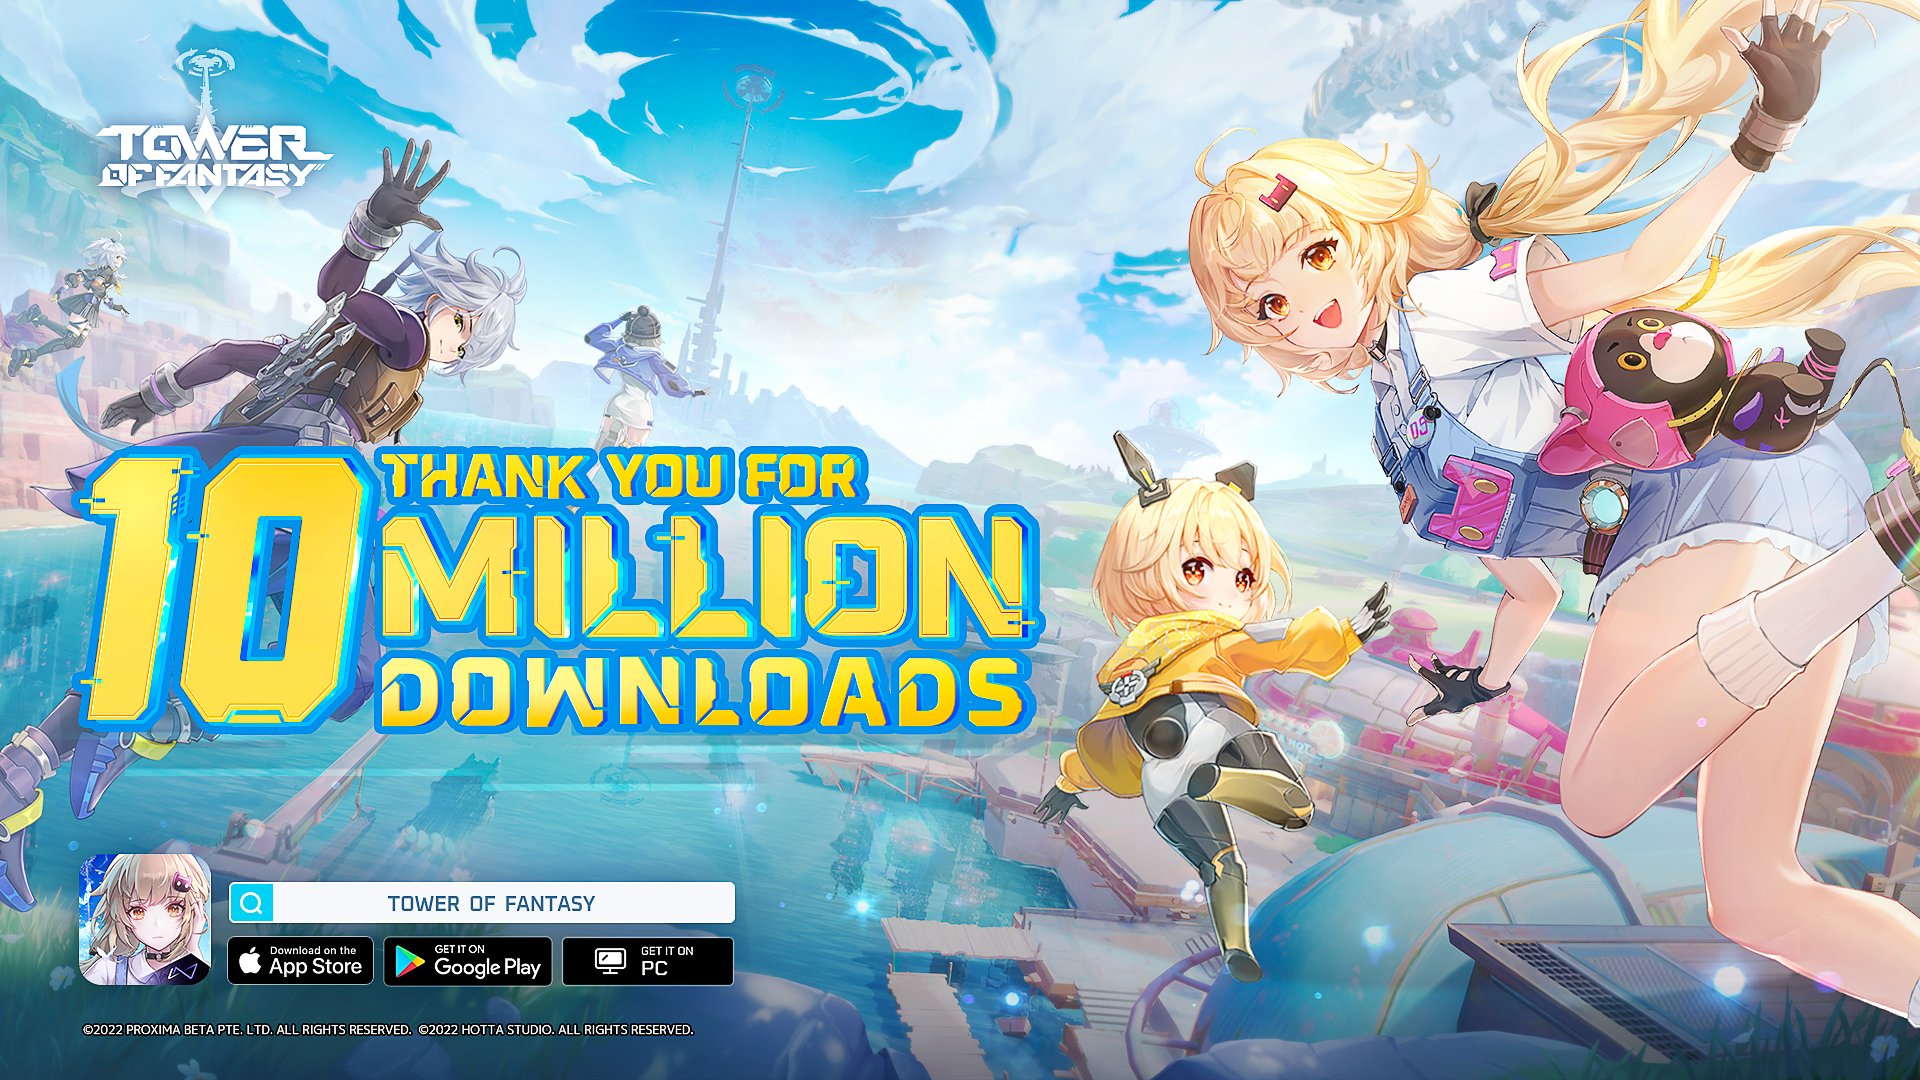 Tower Fantasy - Download & Play on PC